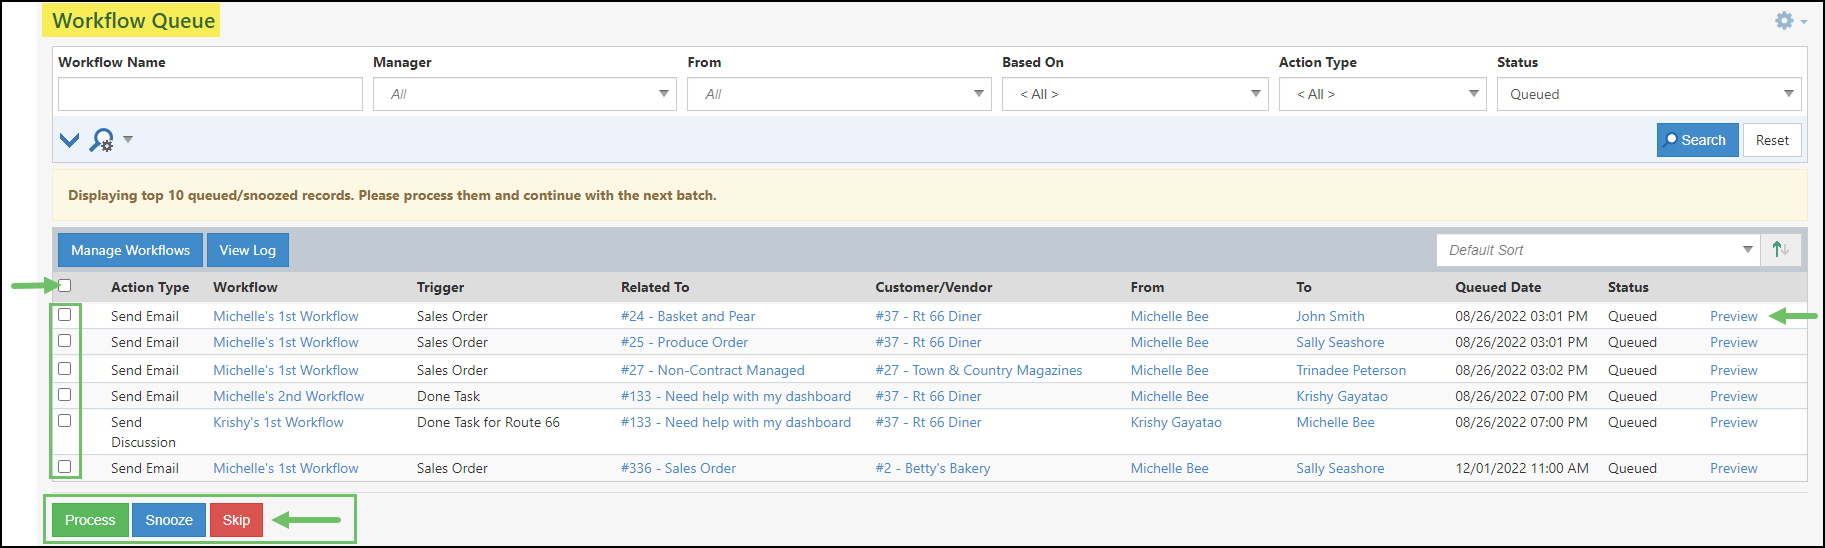 Workflow Queue page in Striven